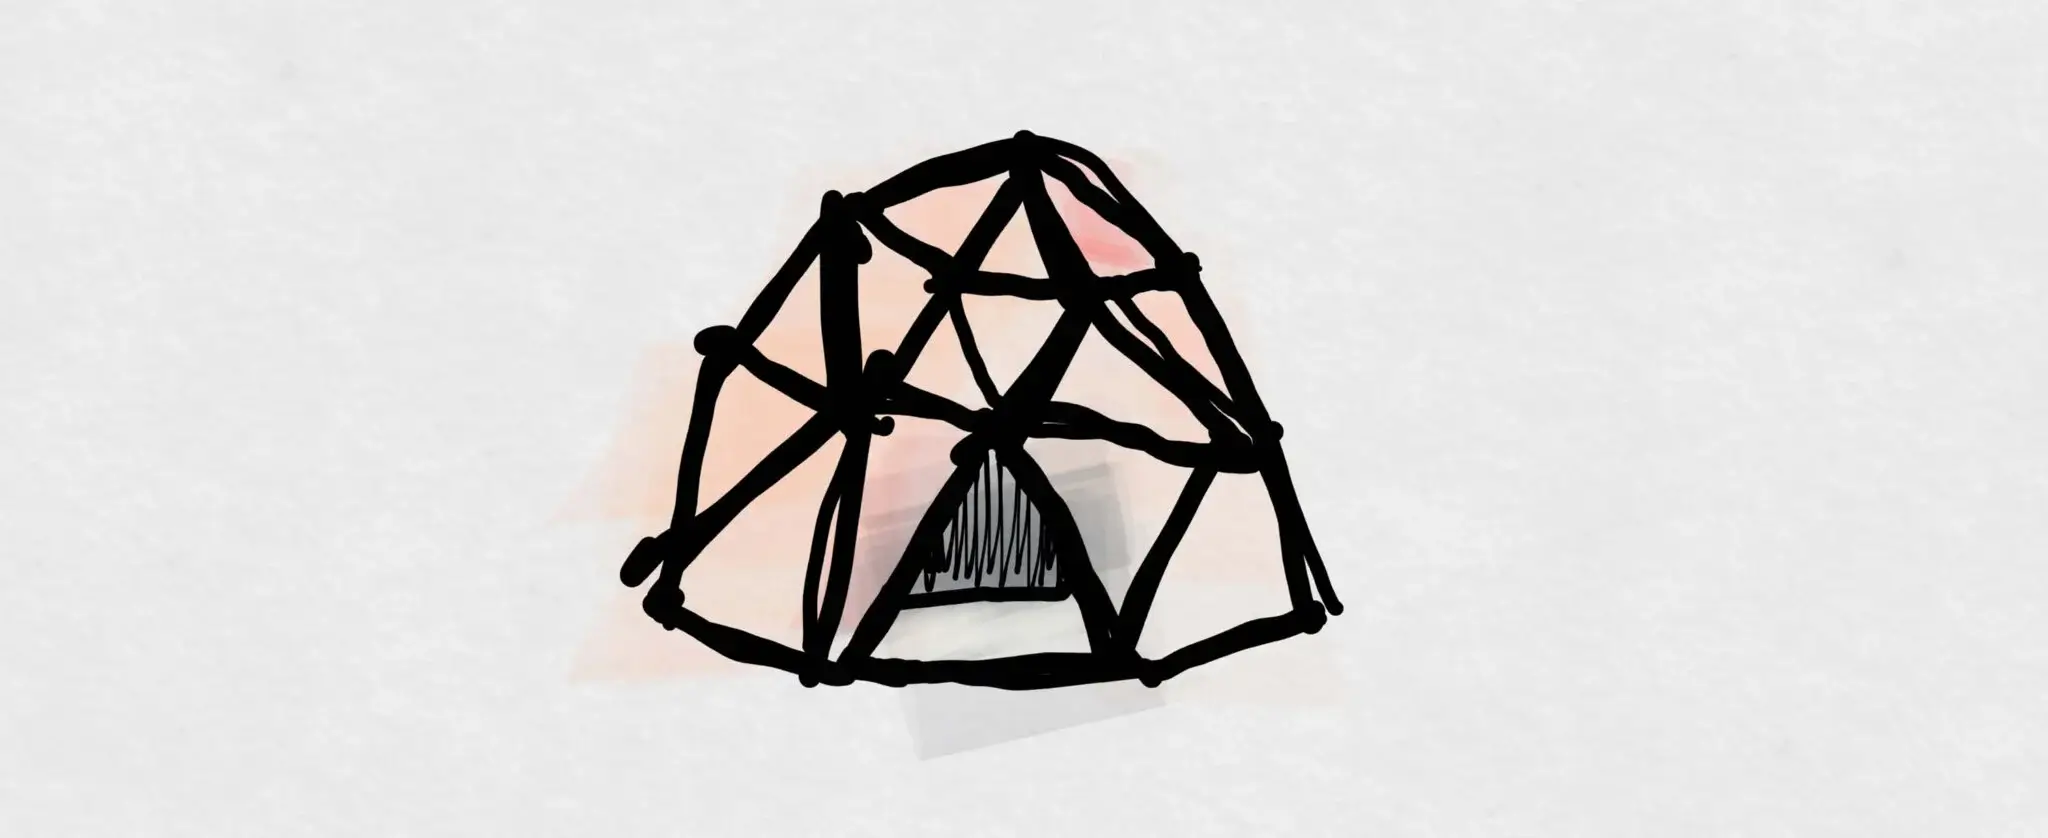 A concept drawing of the filter dome